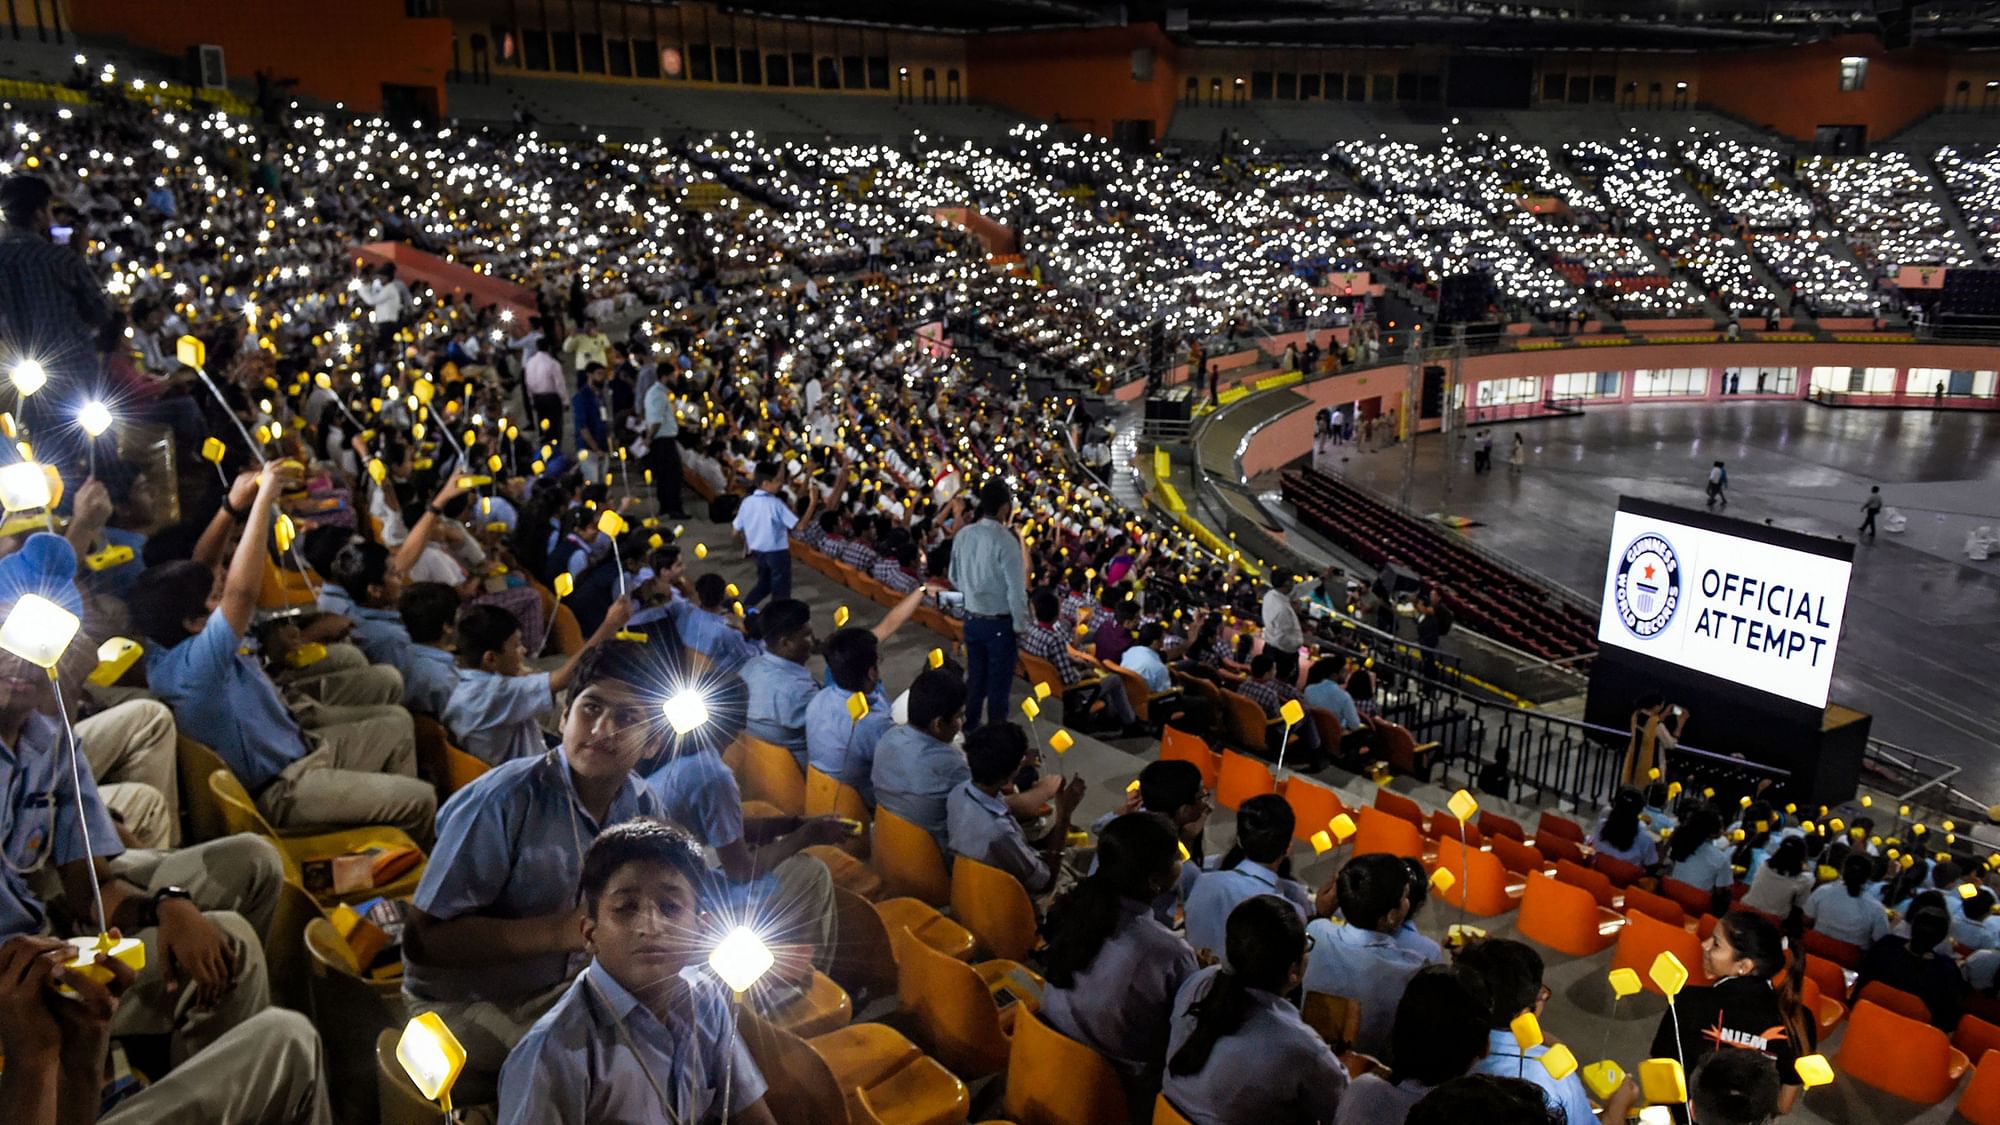 Thousands of students gather for Global Student Solar Assembly  at Indira Gandhi Indoor Stadium in New Delhi. Students lit solar lamps in unison in an attempt for Guinness world record attempt.